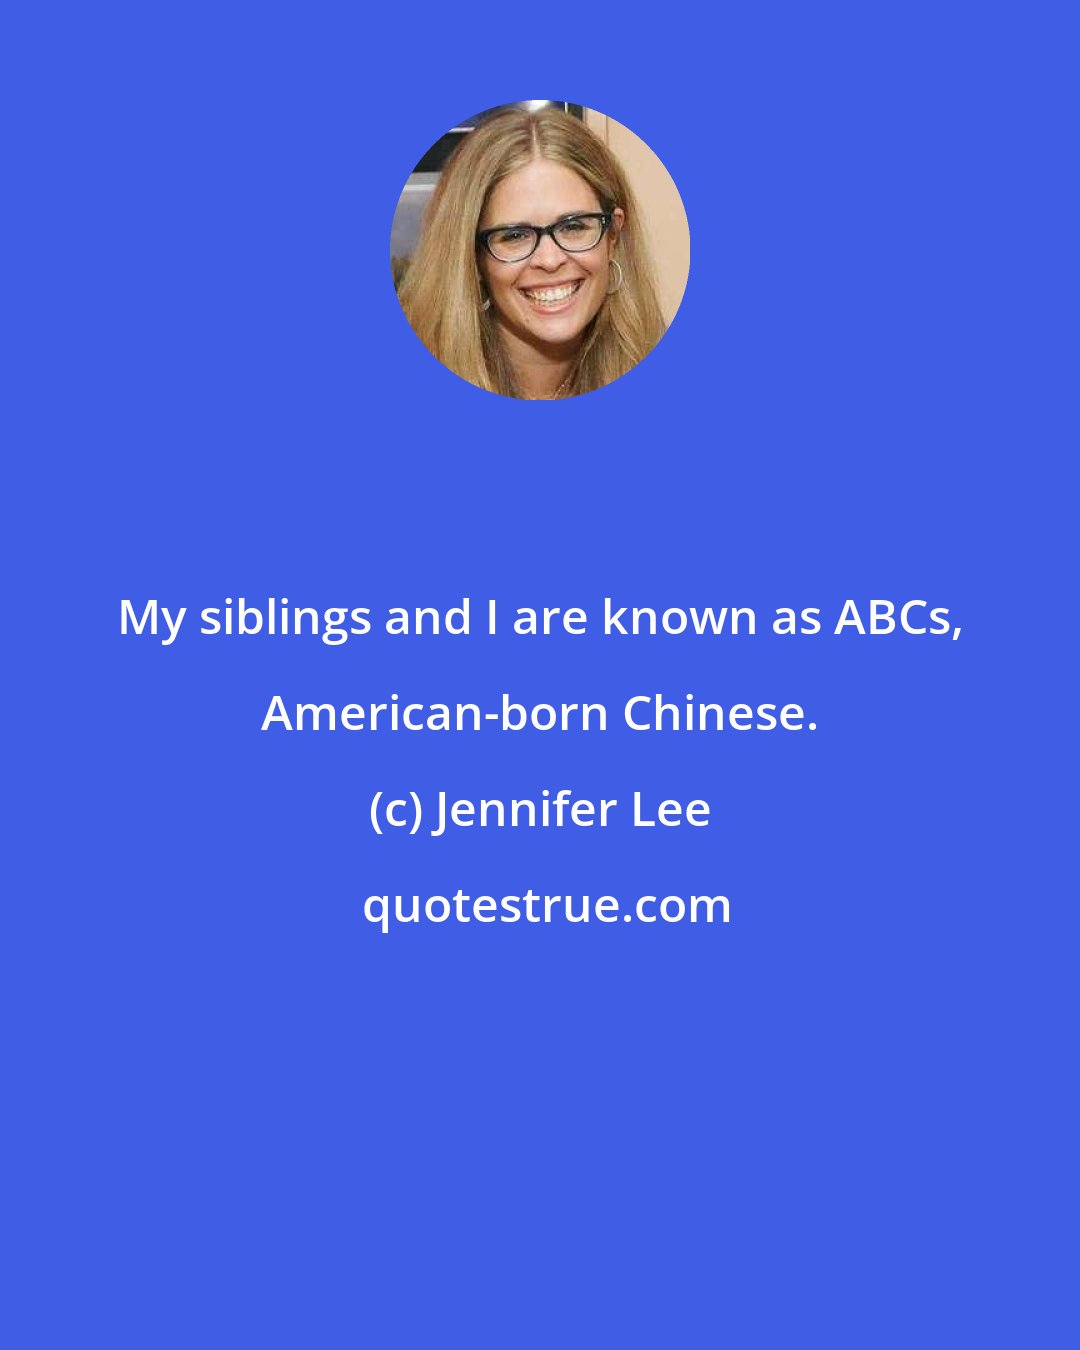 Jennifer Lee: My siblings and I are known as ABCs, American-born Chinese.